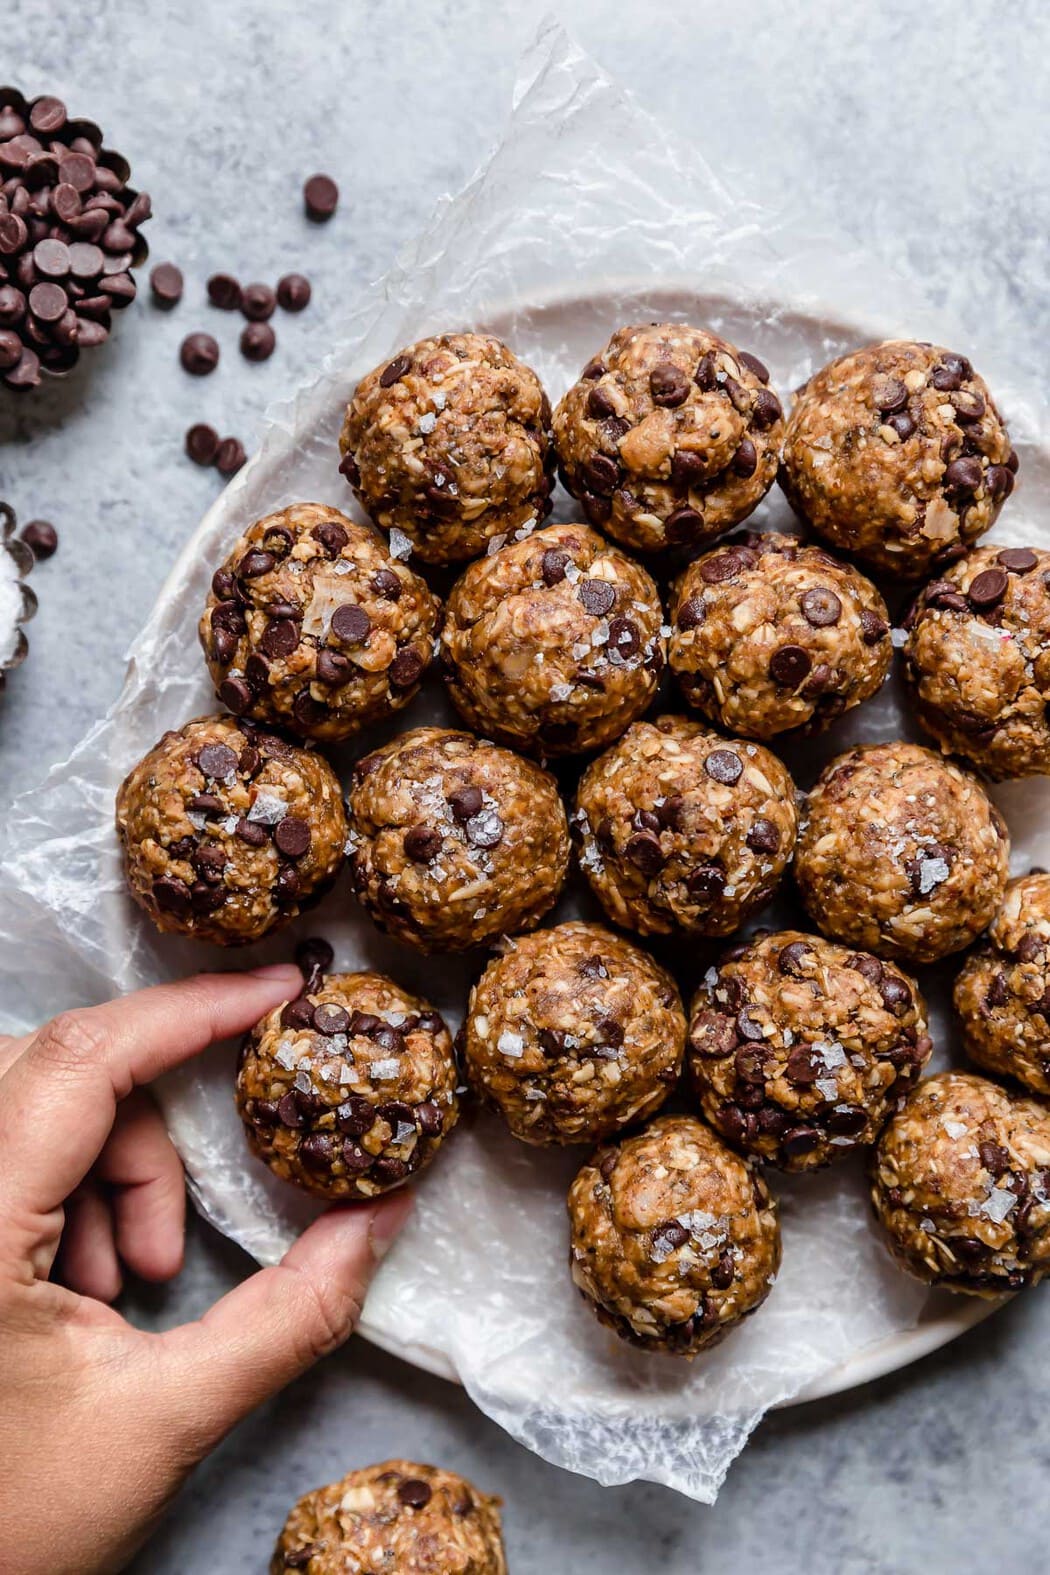 Peanut Butter Oatmeal Balls on a platter with a hand grabbing one of the bites.